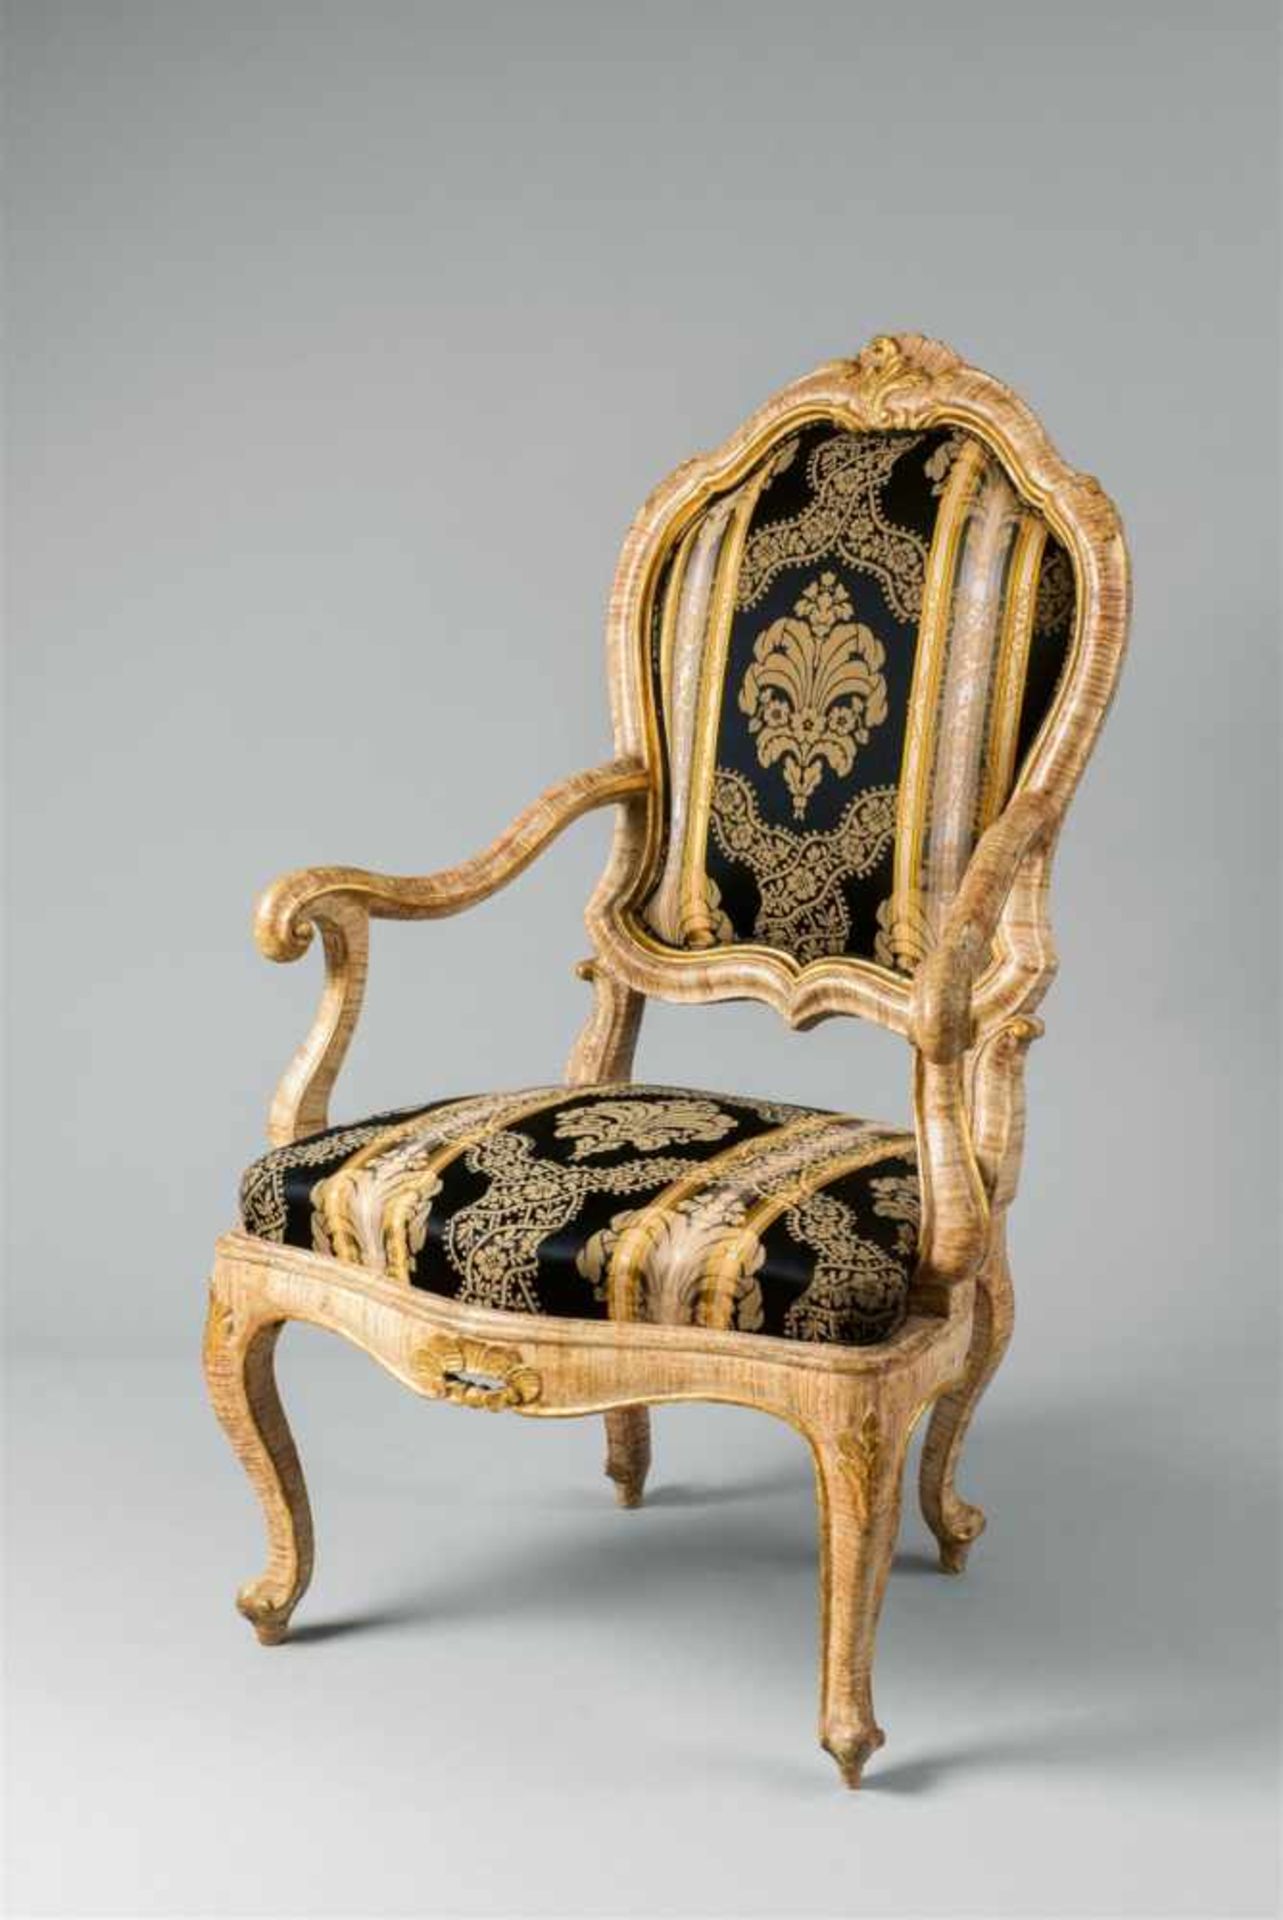 A poltrona veneziana armchairPainted and gilt wood, modern textile covers over replaced